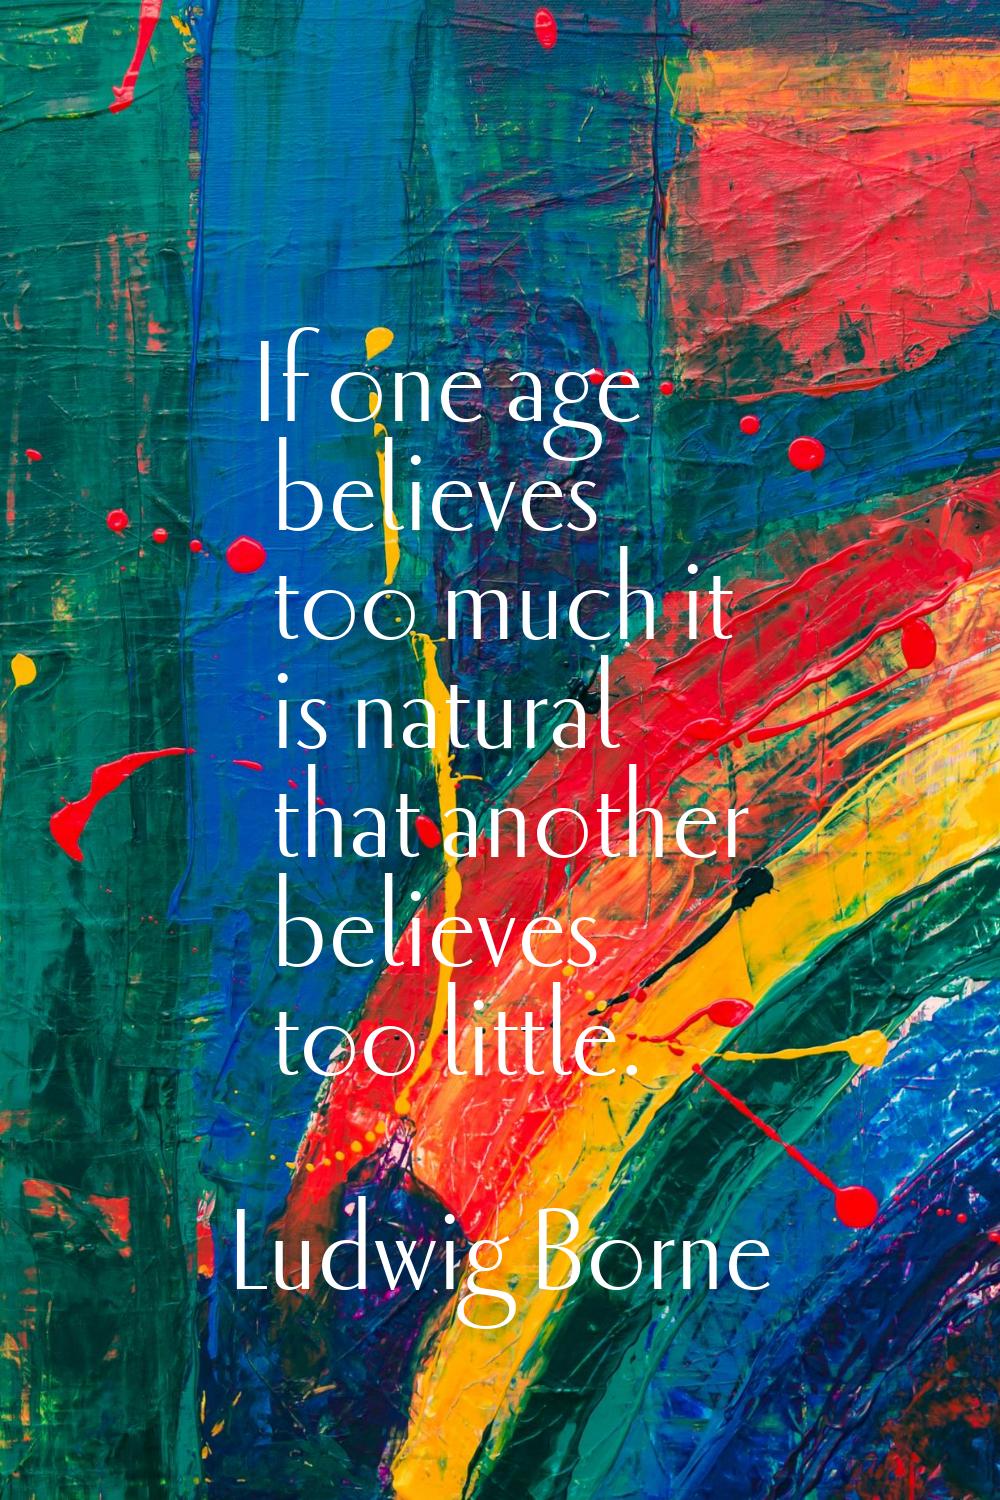 If one age believes too much it is natural that another believes too little.